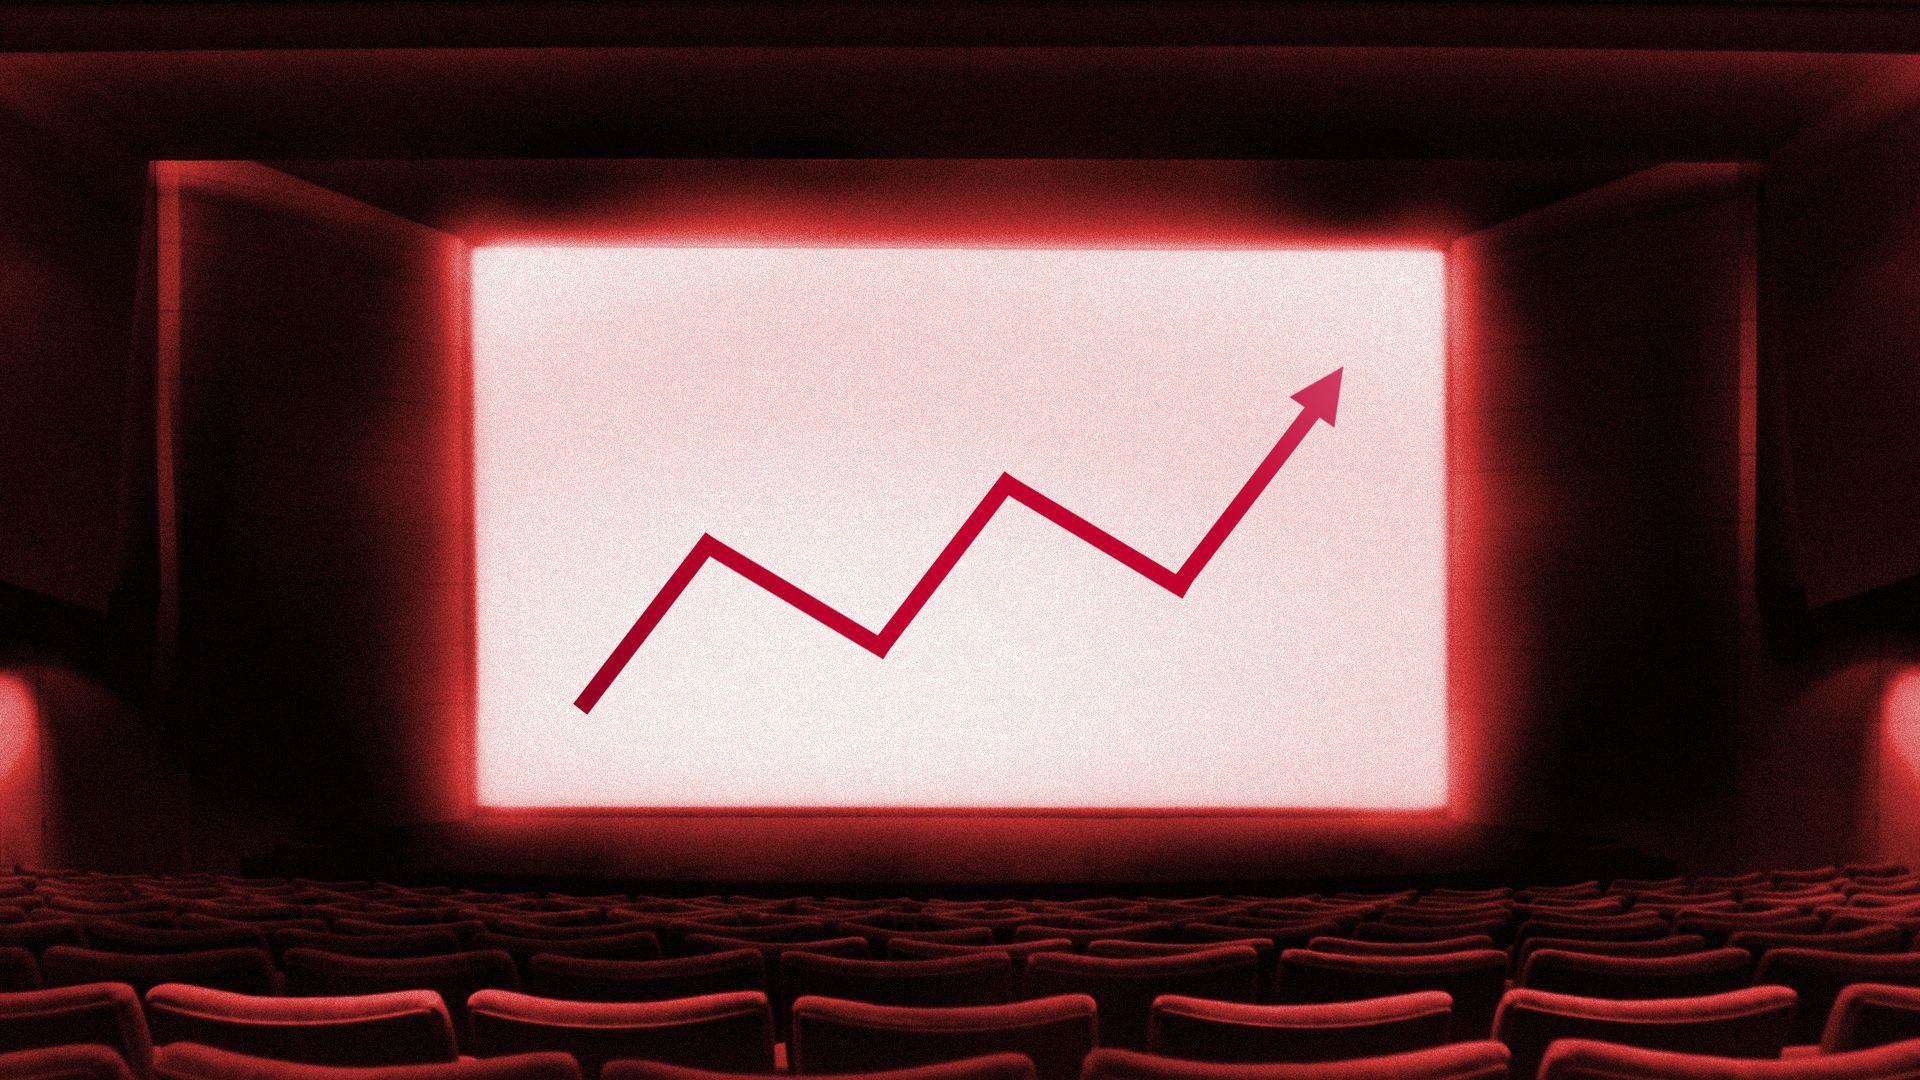 Illustration of a movie theater screen with a bar graph going up.